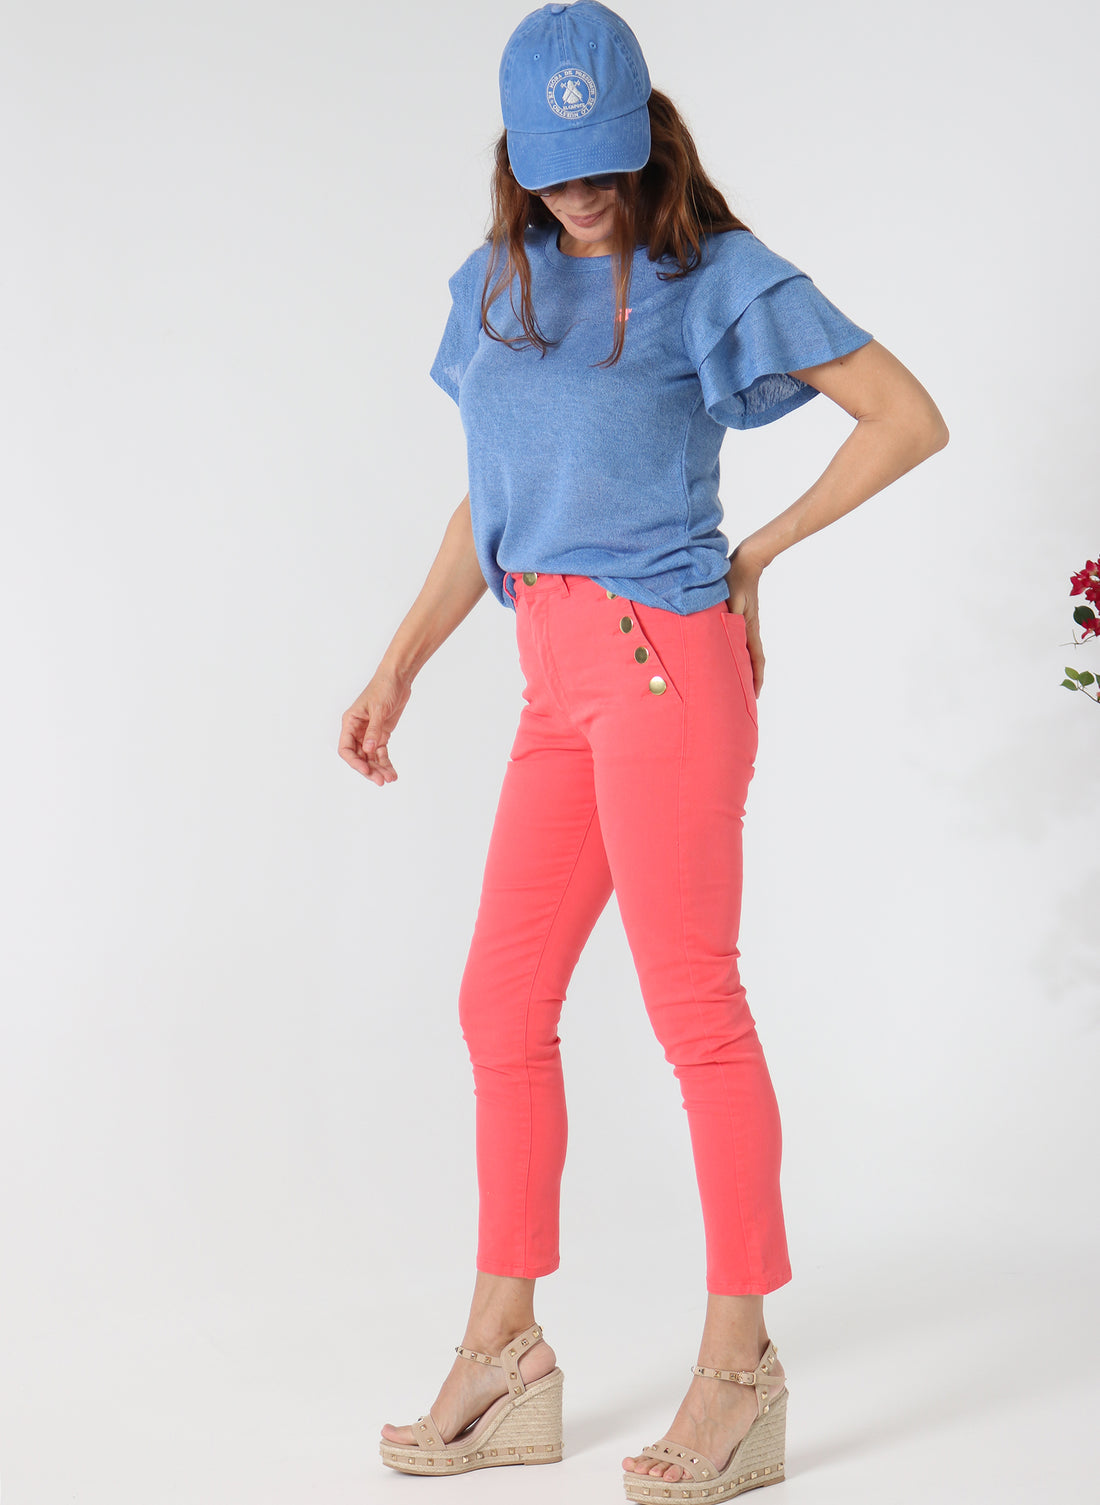 Twill Corail Buttons Femme Pant